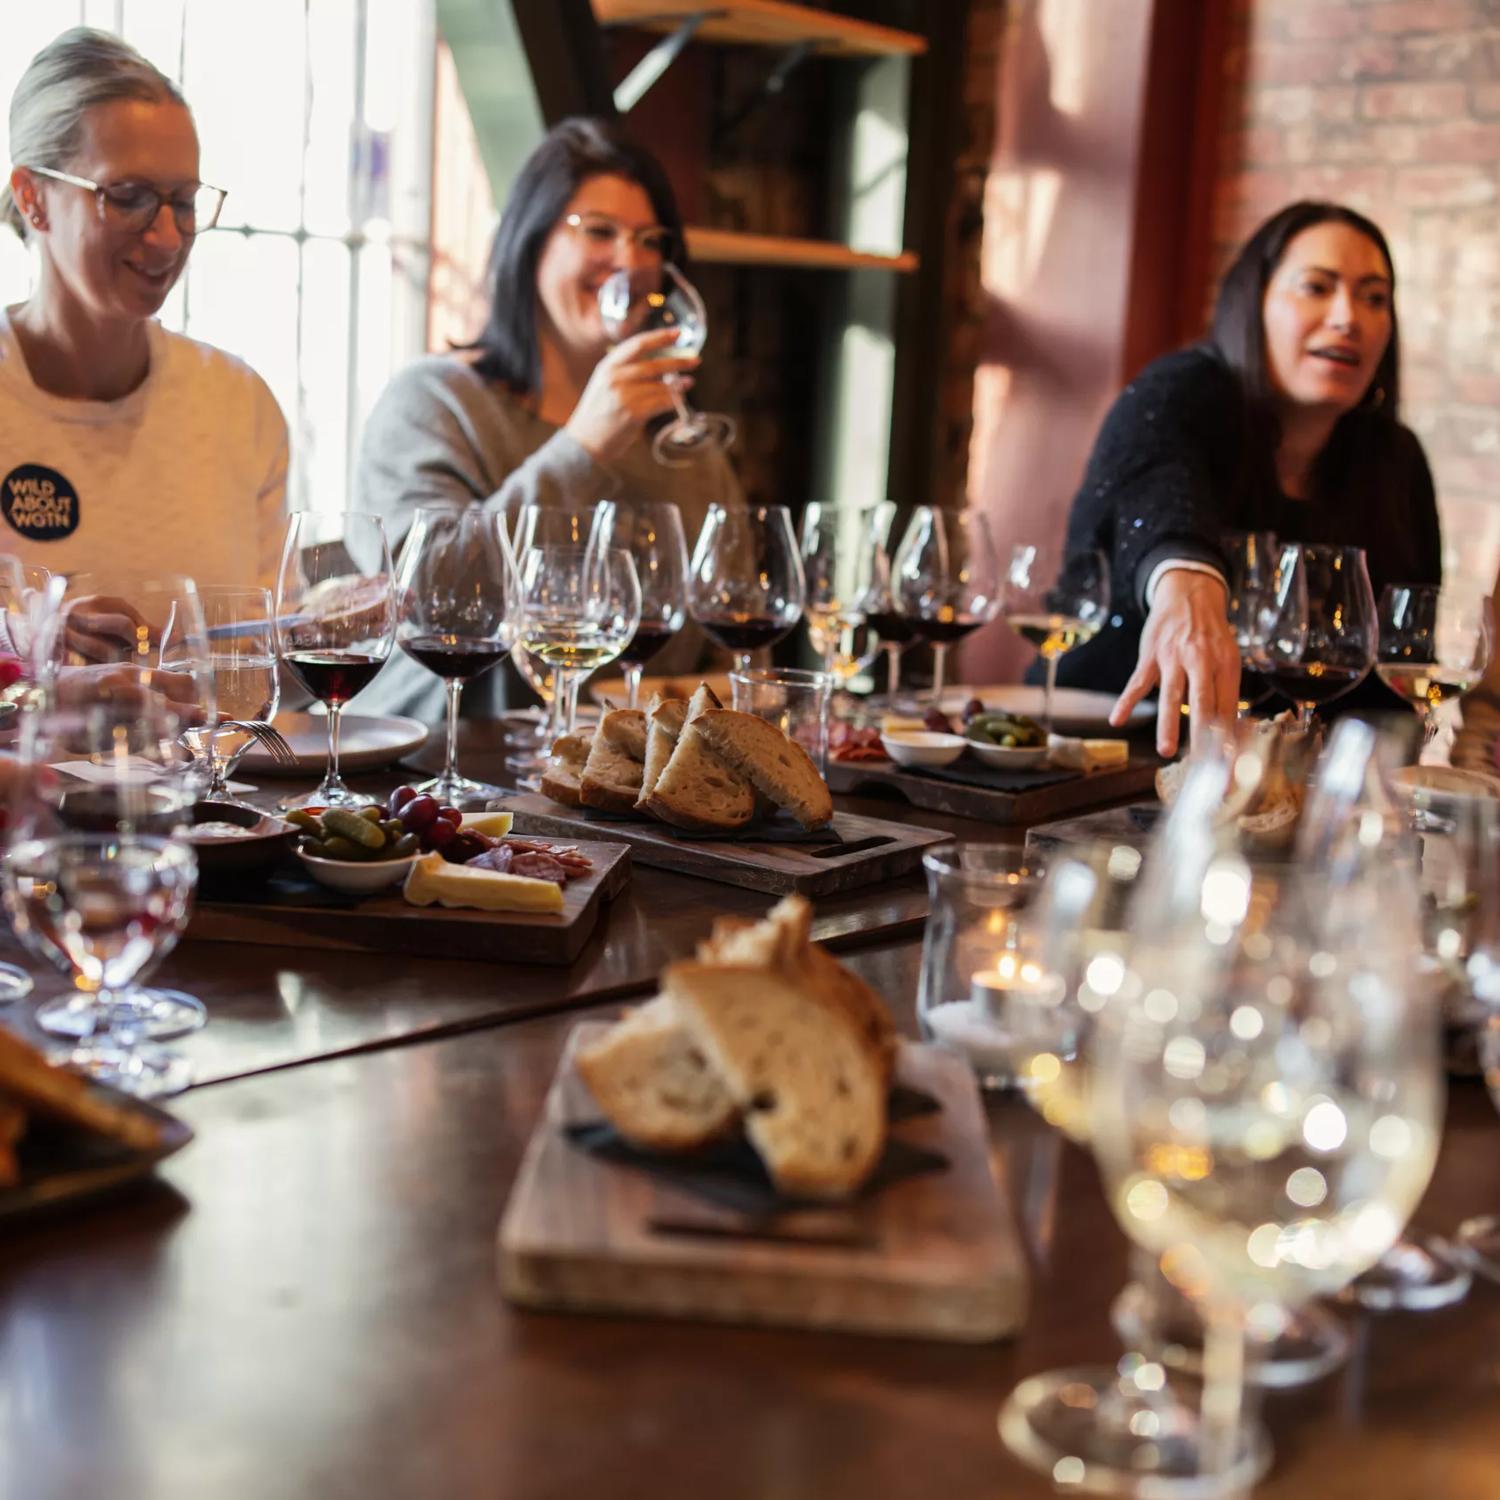 A group of people are doing a wine tasting at Noble Rot, a wine bar located in Te Aro, Wellington.